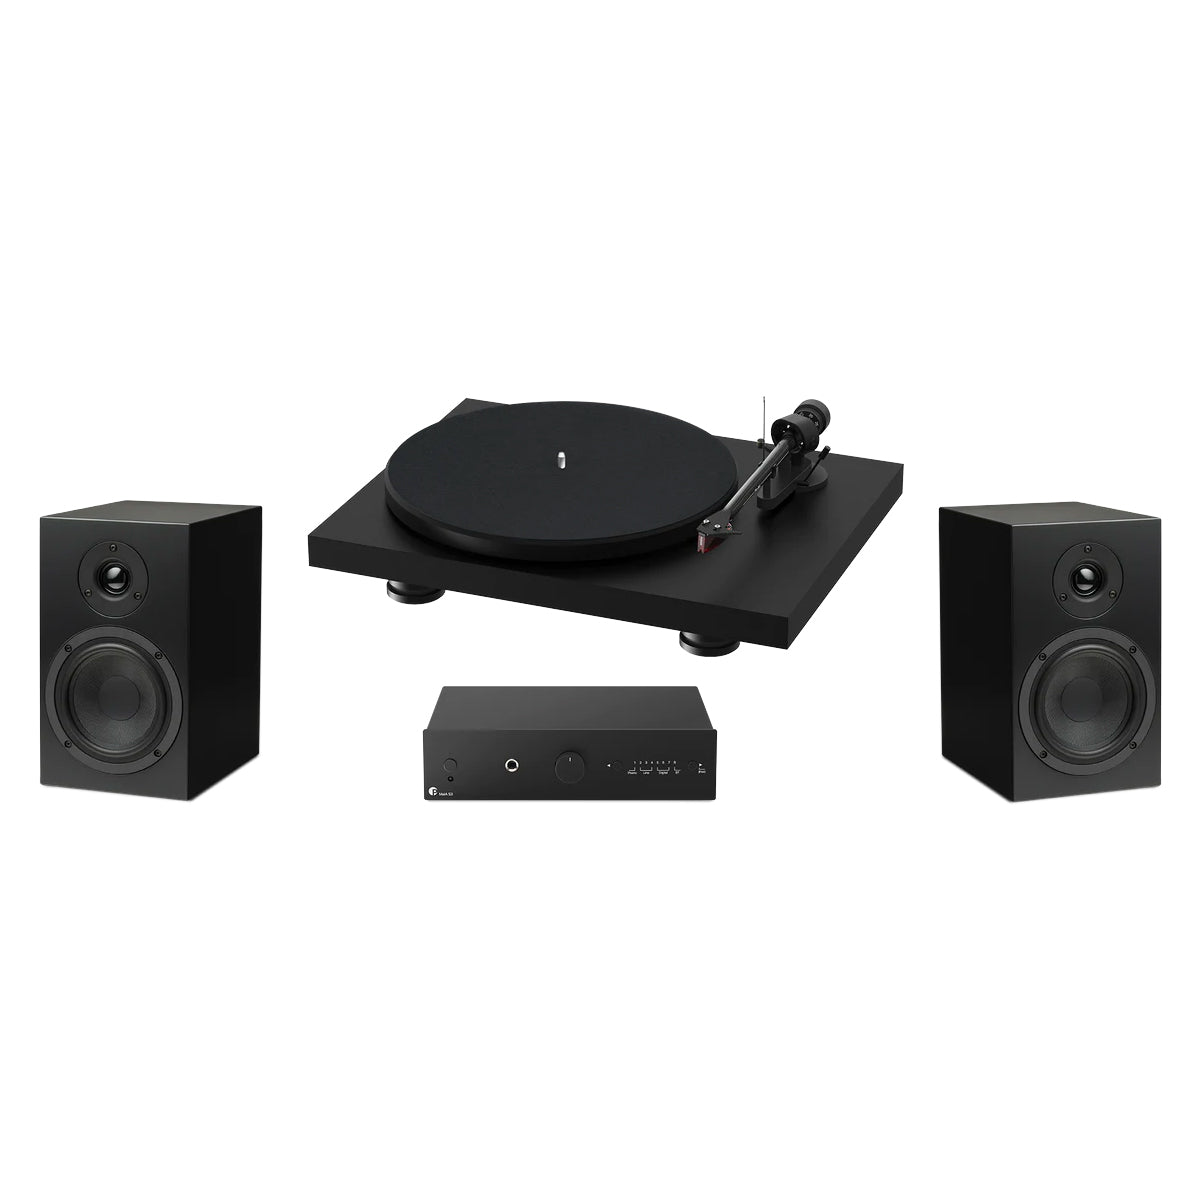 Pro-Ject Colorful Audio System - Black TT/Black Speakers - The Audio Experts